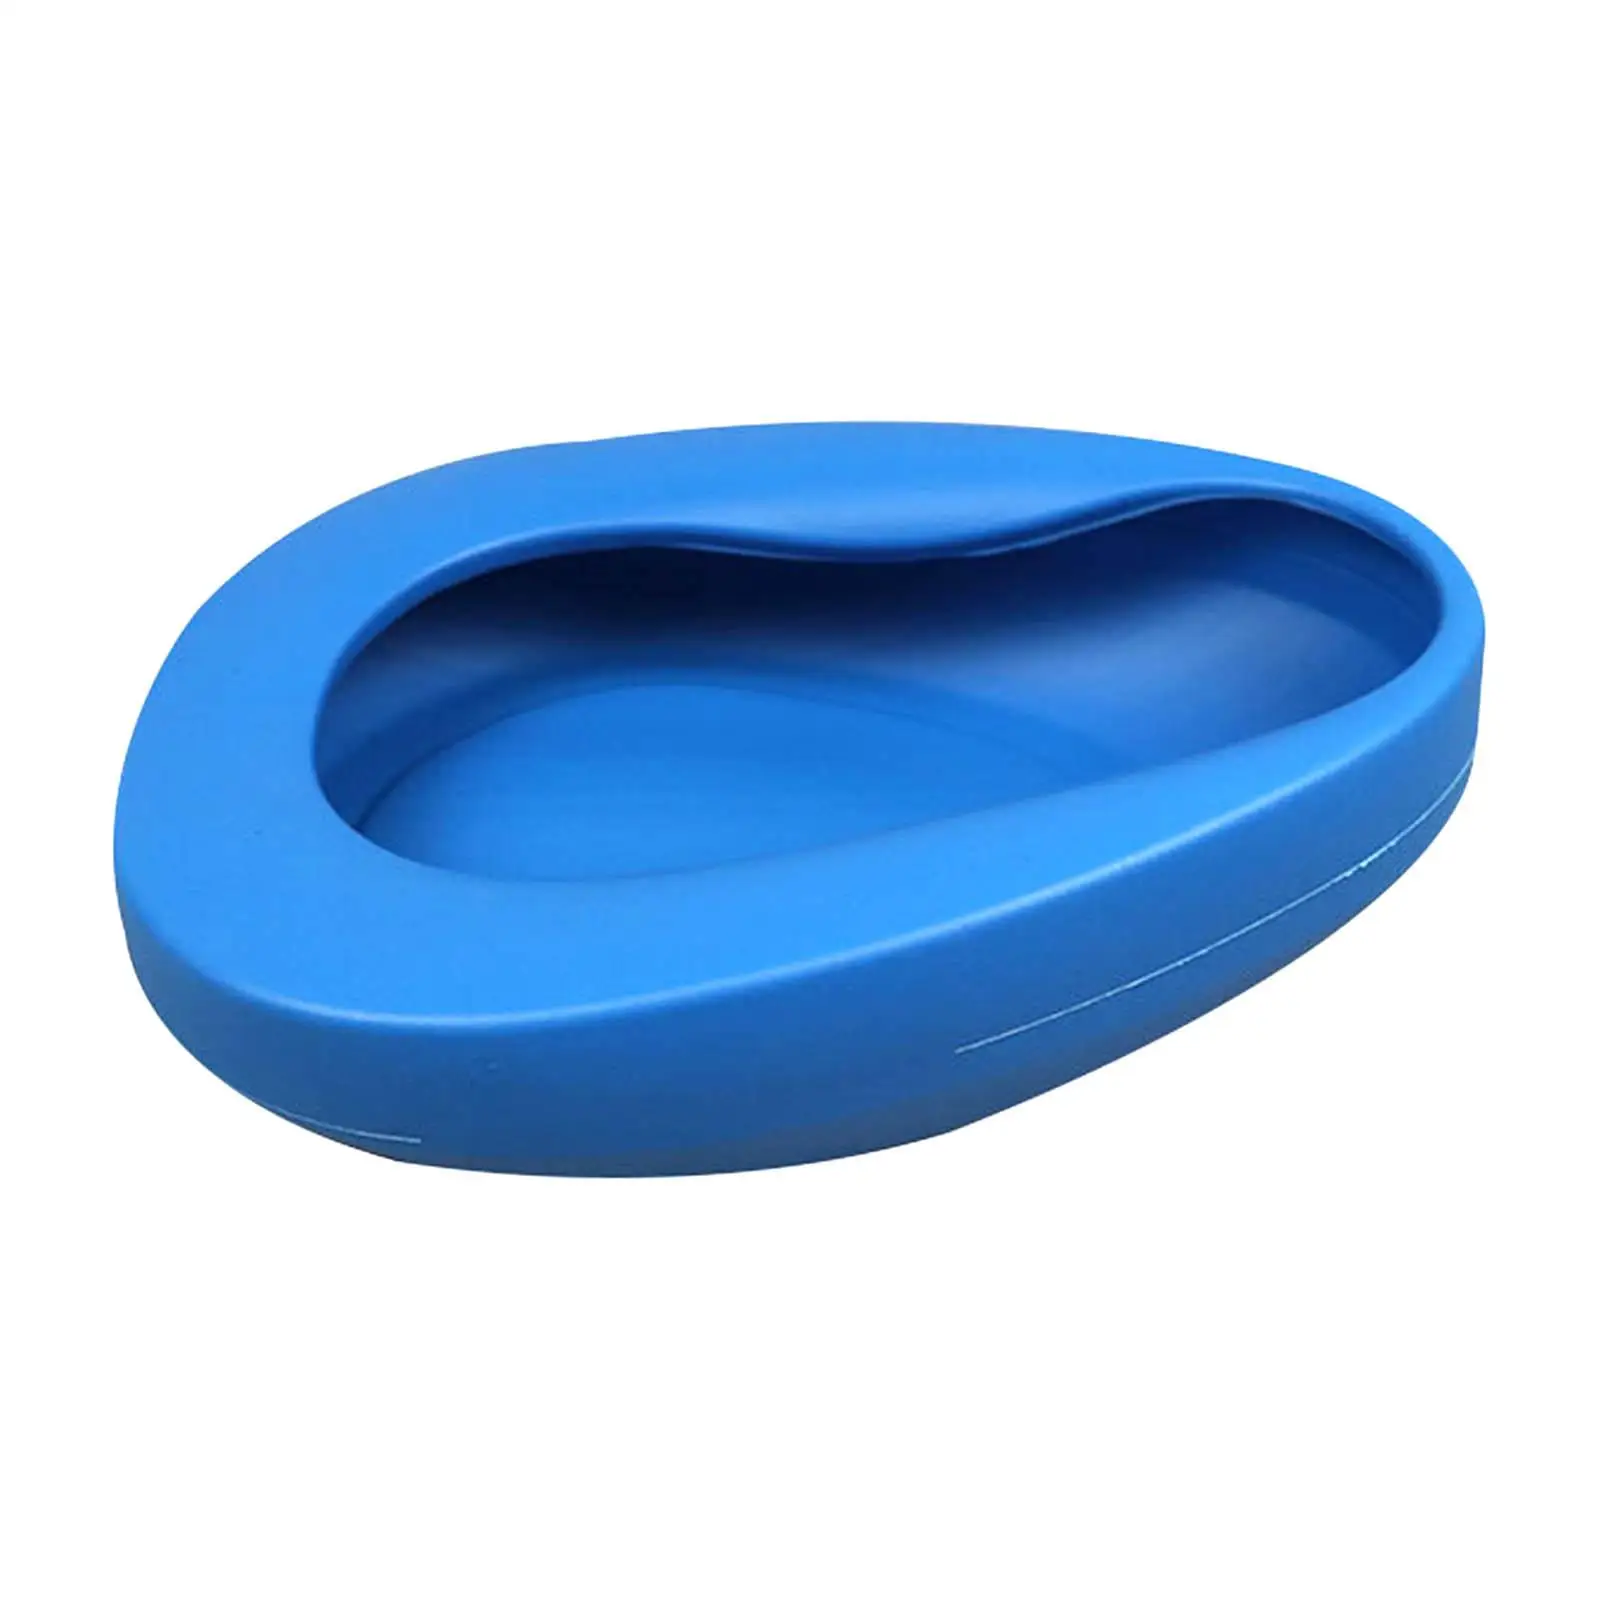 Bedpan for Home Use Durable Easy Use Bed Pan for Bedridden Patient Women Men